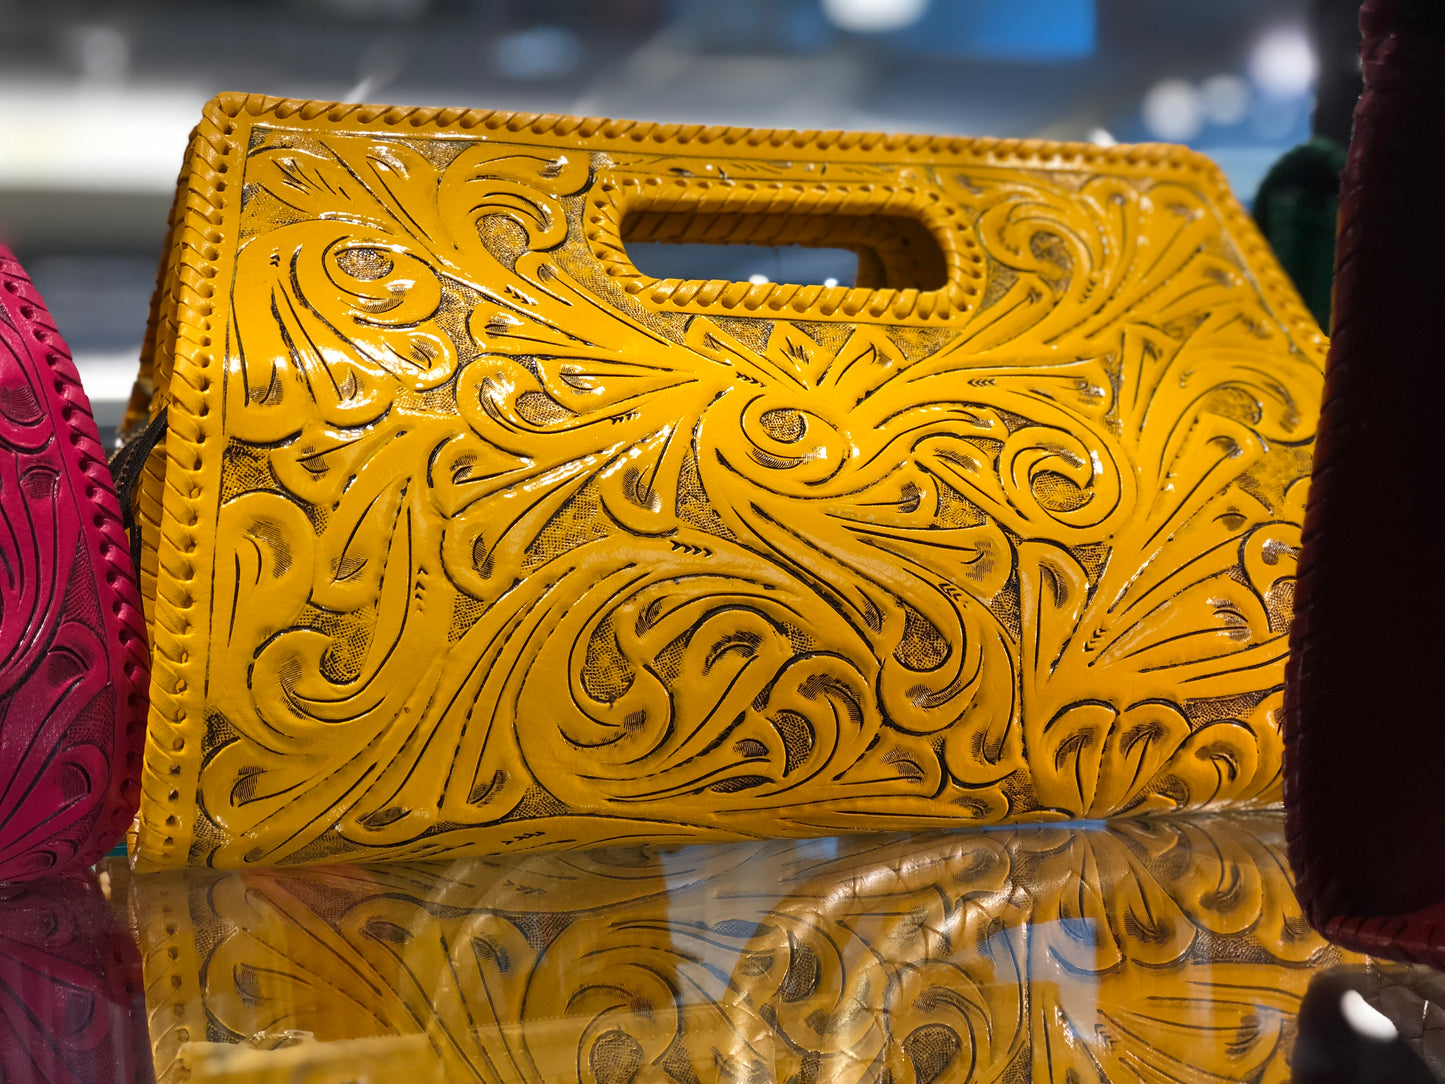 Hand-Tooled Leather Large Clutch Bag "Envelope" by ALLE more Colors - ALLE Handbags